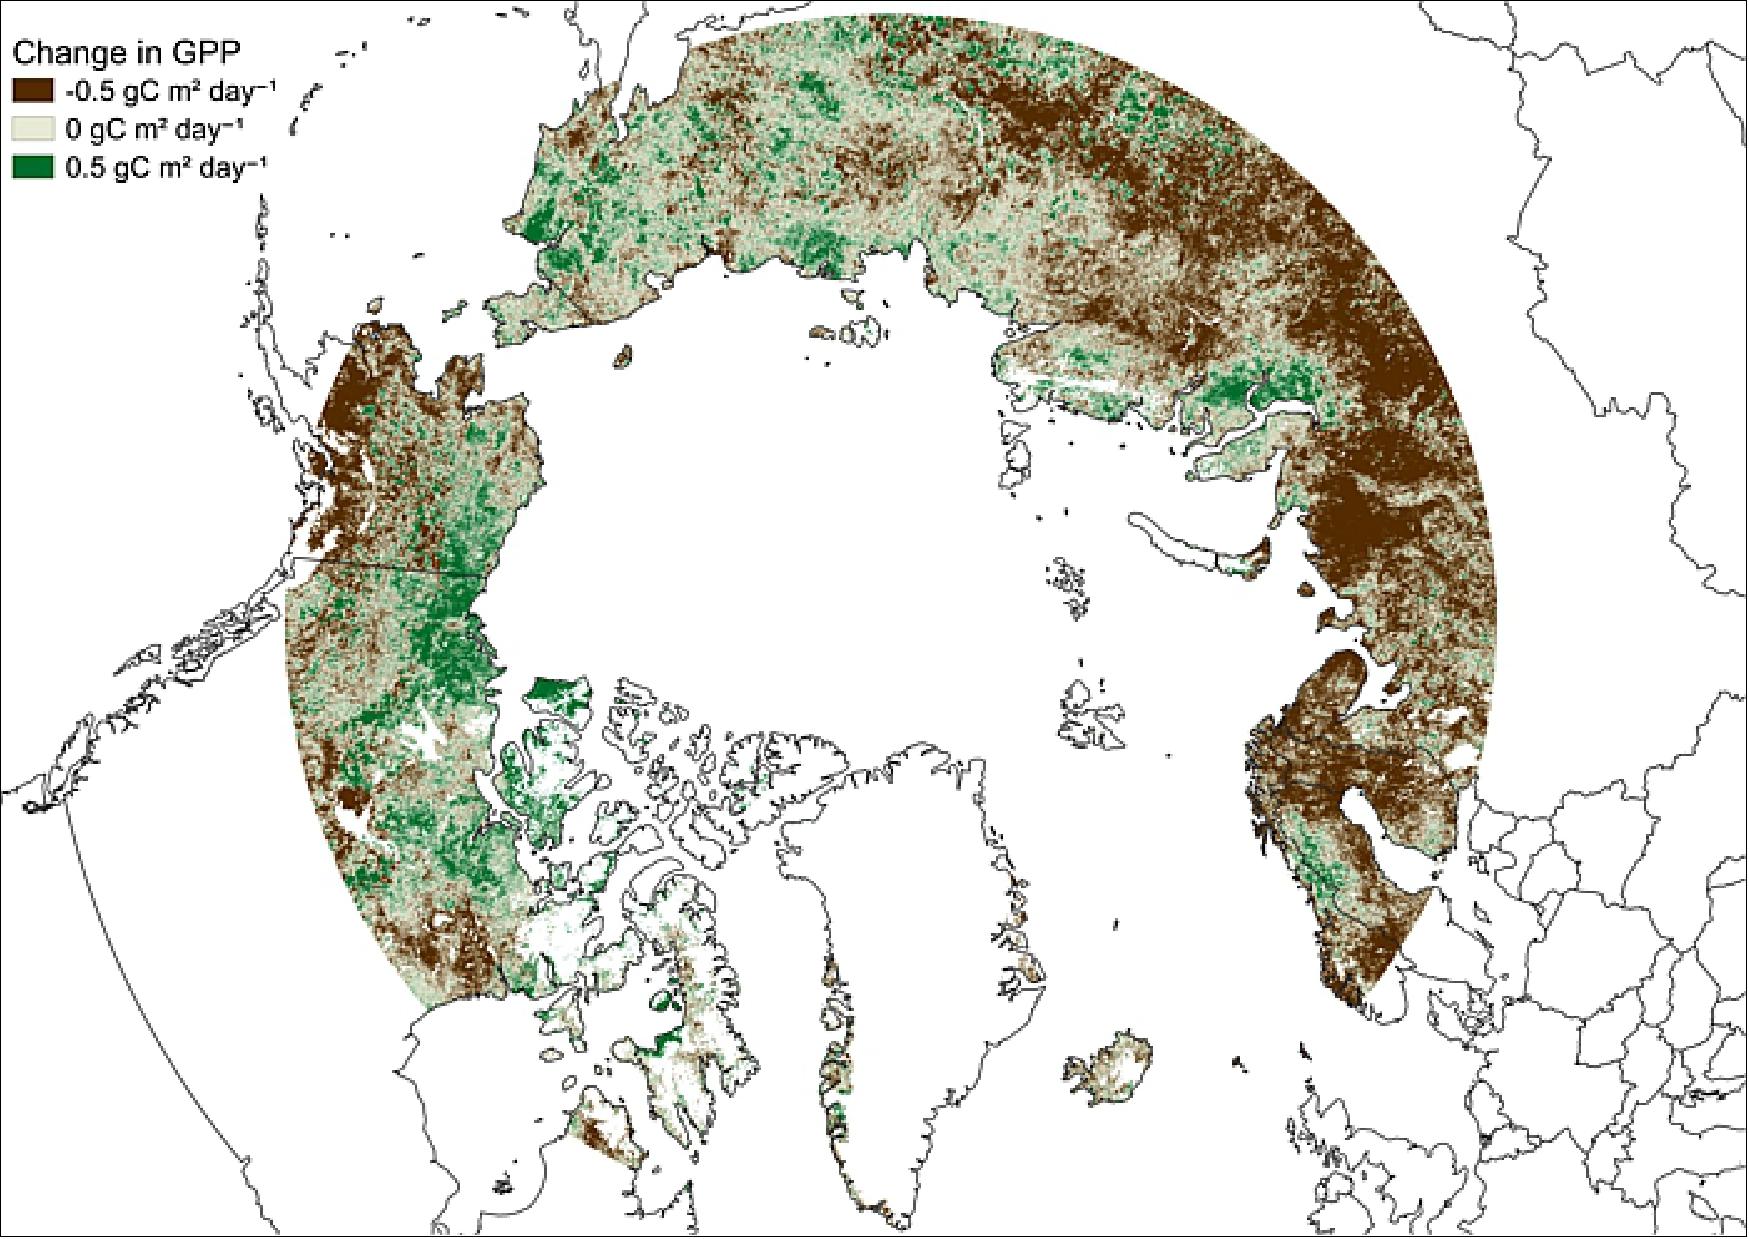 Figure 15: Changing Arctic productivity. In parts of the Arctic tundra, temperatures are increasing rapidly as a result of climate change. This has resulted in complex changes in plant communities, with satellite data showing that some parts of the Arctic are ‘greening’ whilst other areas are said to be ‘browning’. Using the Earth System Data Lab, scientists are looking at components such as rock or soil types to understand changes in plant productivity in the Arctic, beyond just temperature. The image shows changes in mean maximum gross primary productivity across five years between 2001–2005 and 2011–2015 at high latitudes (>60°N). Notable changes in gross primary productivity are evident including large increases in northern Canada, and decreases in parts of Alaska and Siberia, highlighting the heterogeneous pattern of productivity change over time (image credit: ESA, derived from FLUXCOM land–atmosphere energy fluxes, hosted on the Earth System Data Lab)